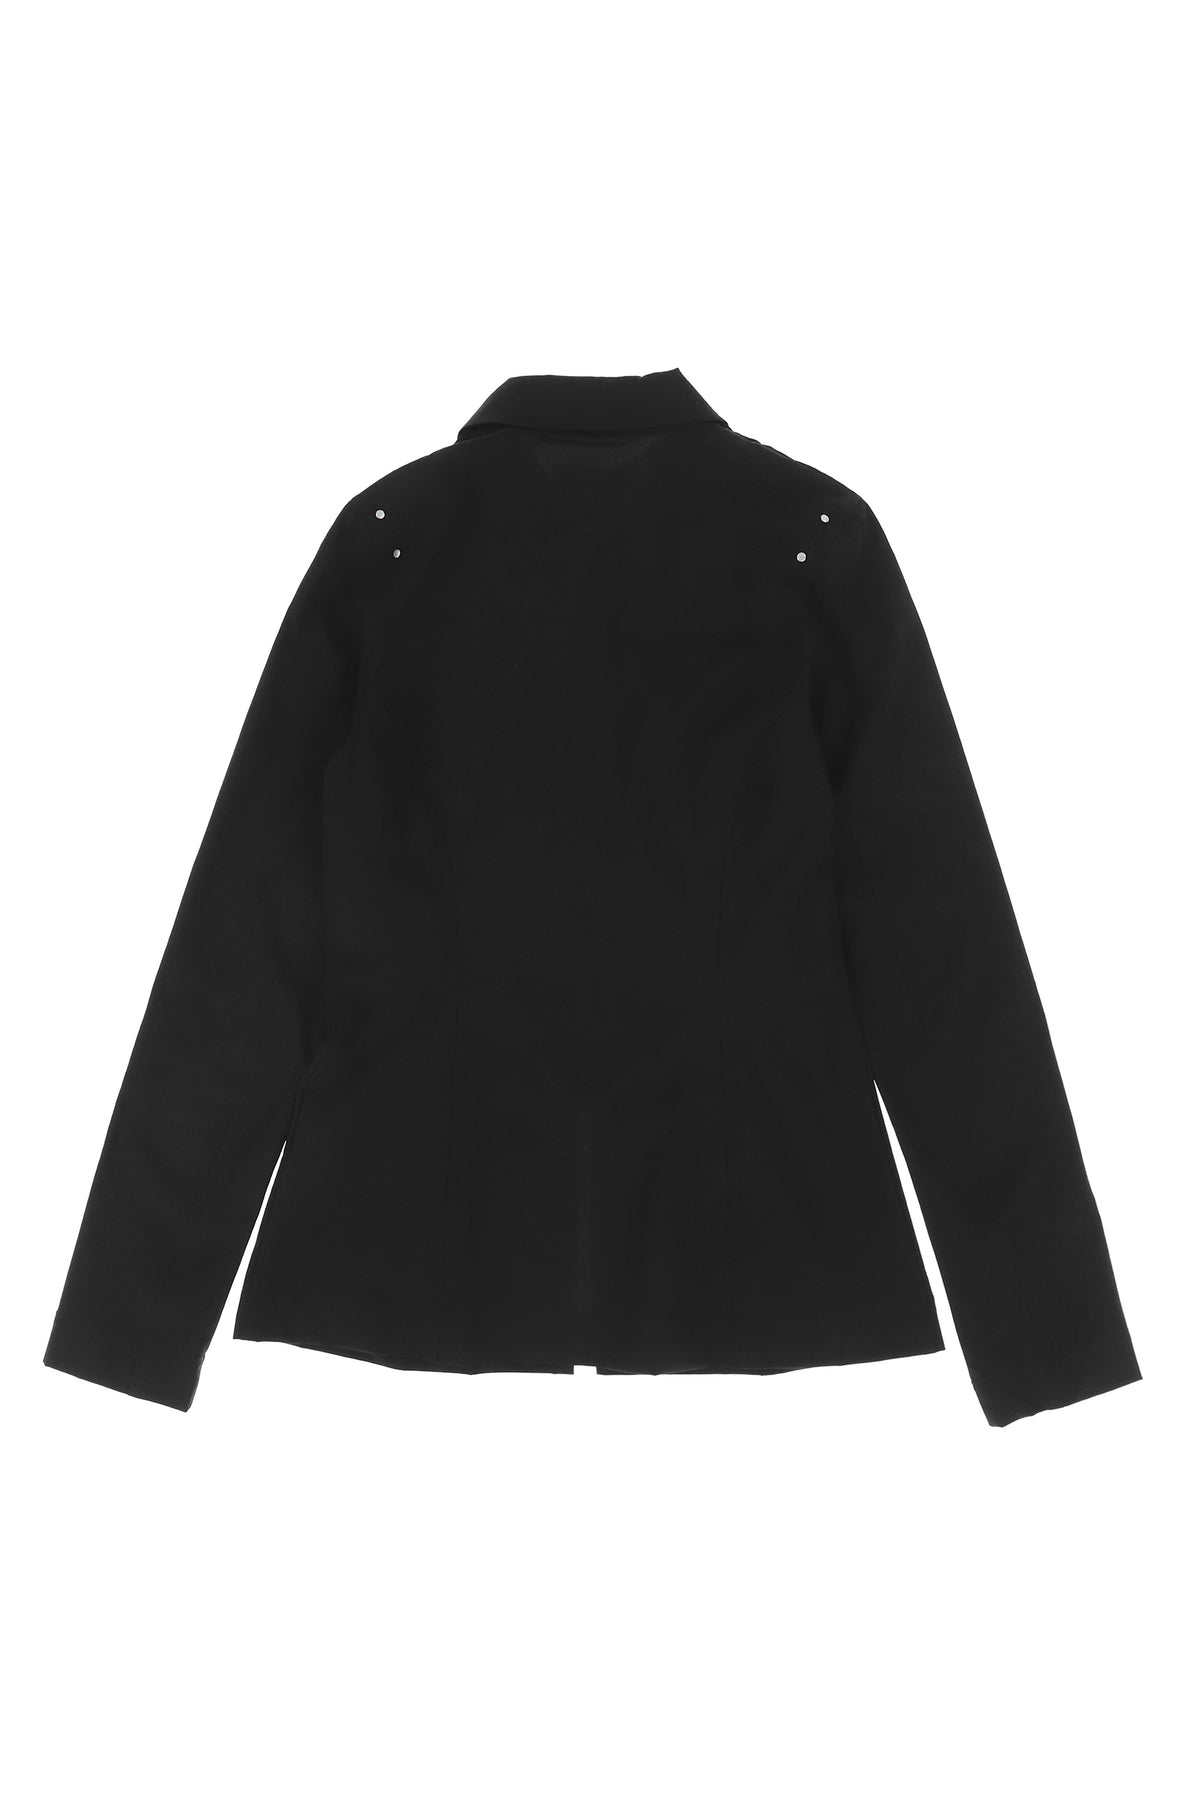 AFFINITY TECHNICAL TAILORED BLAZER / BLK